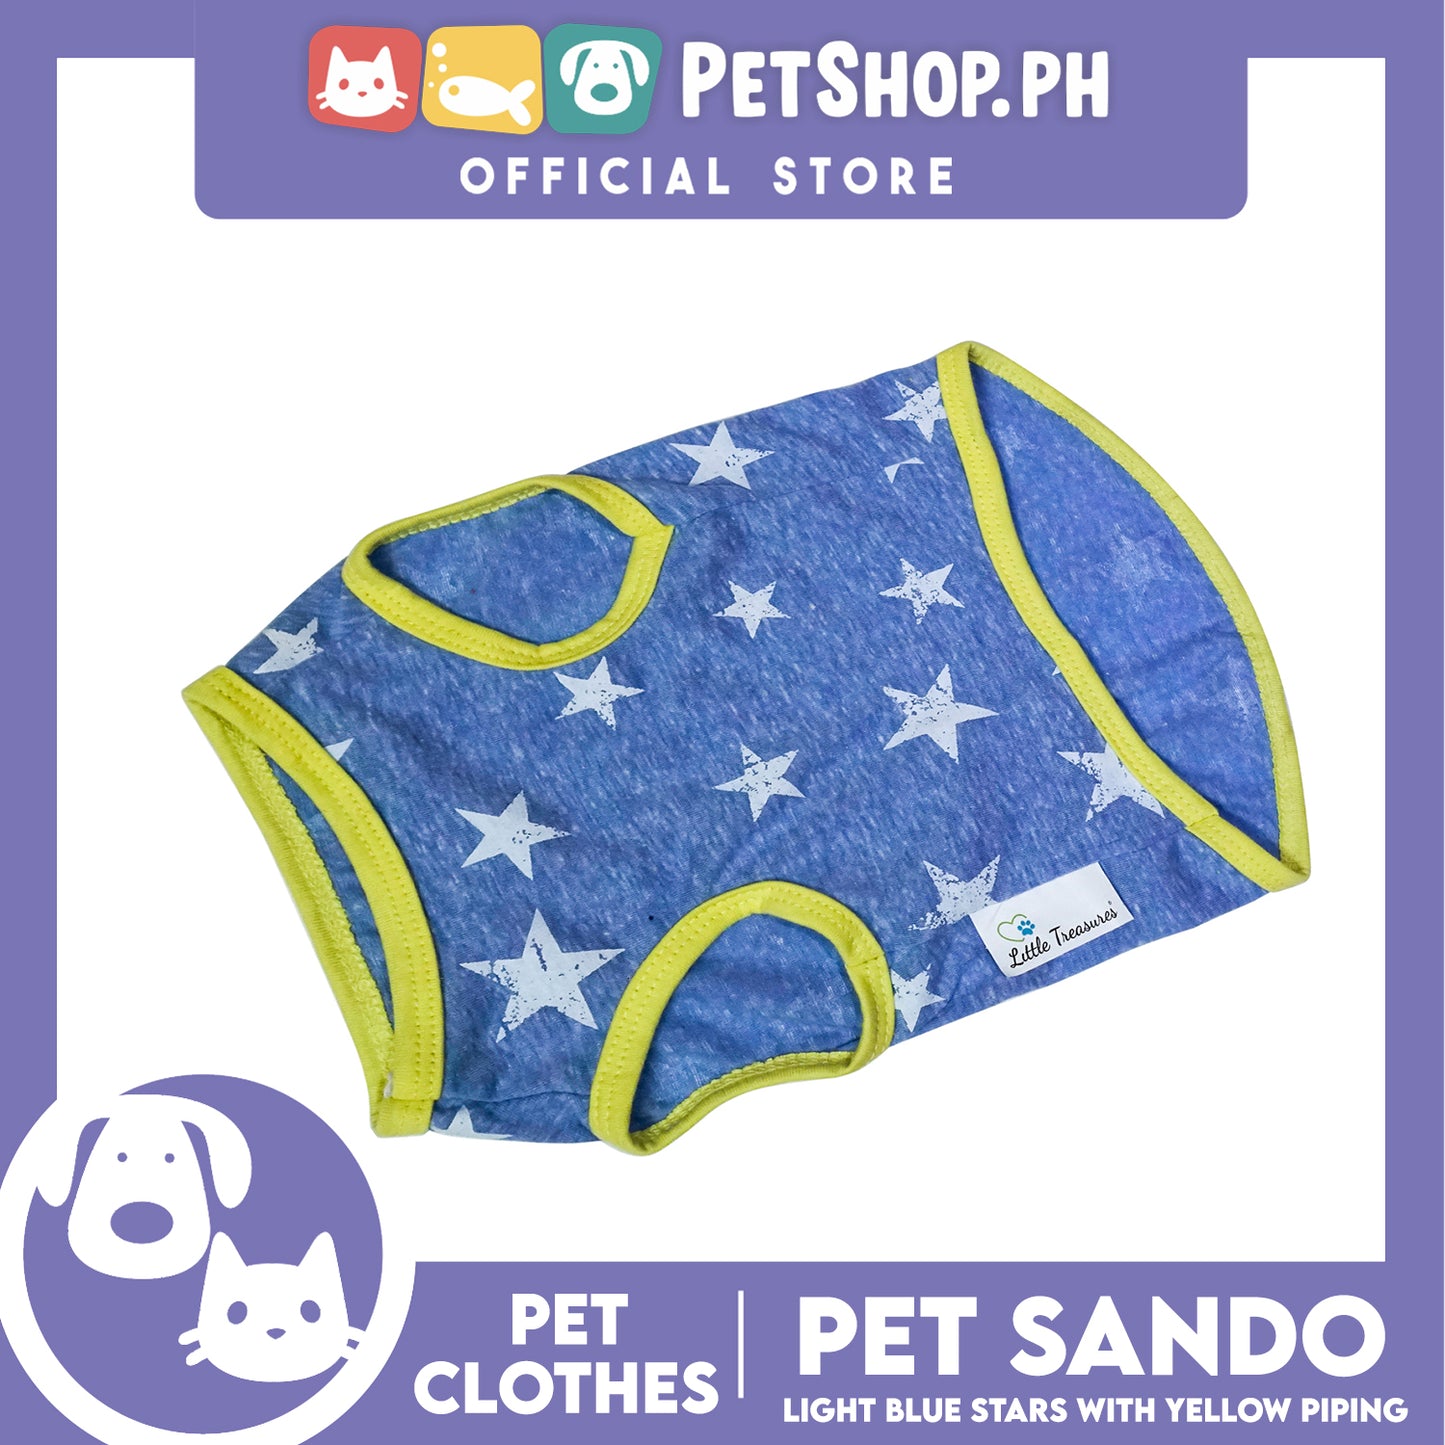 Pet Sando Light Blue Stars with Yellow Piping (Medium) Pet Shirt Clothes Perfect fit for Dogs